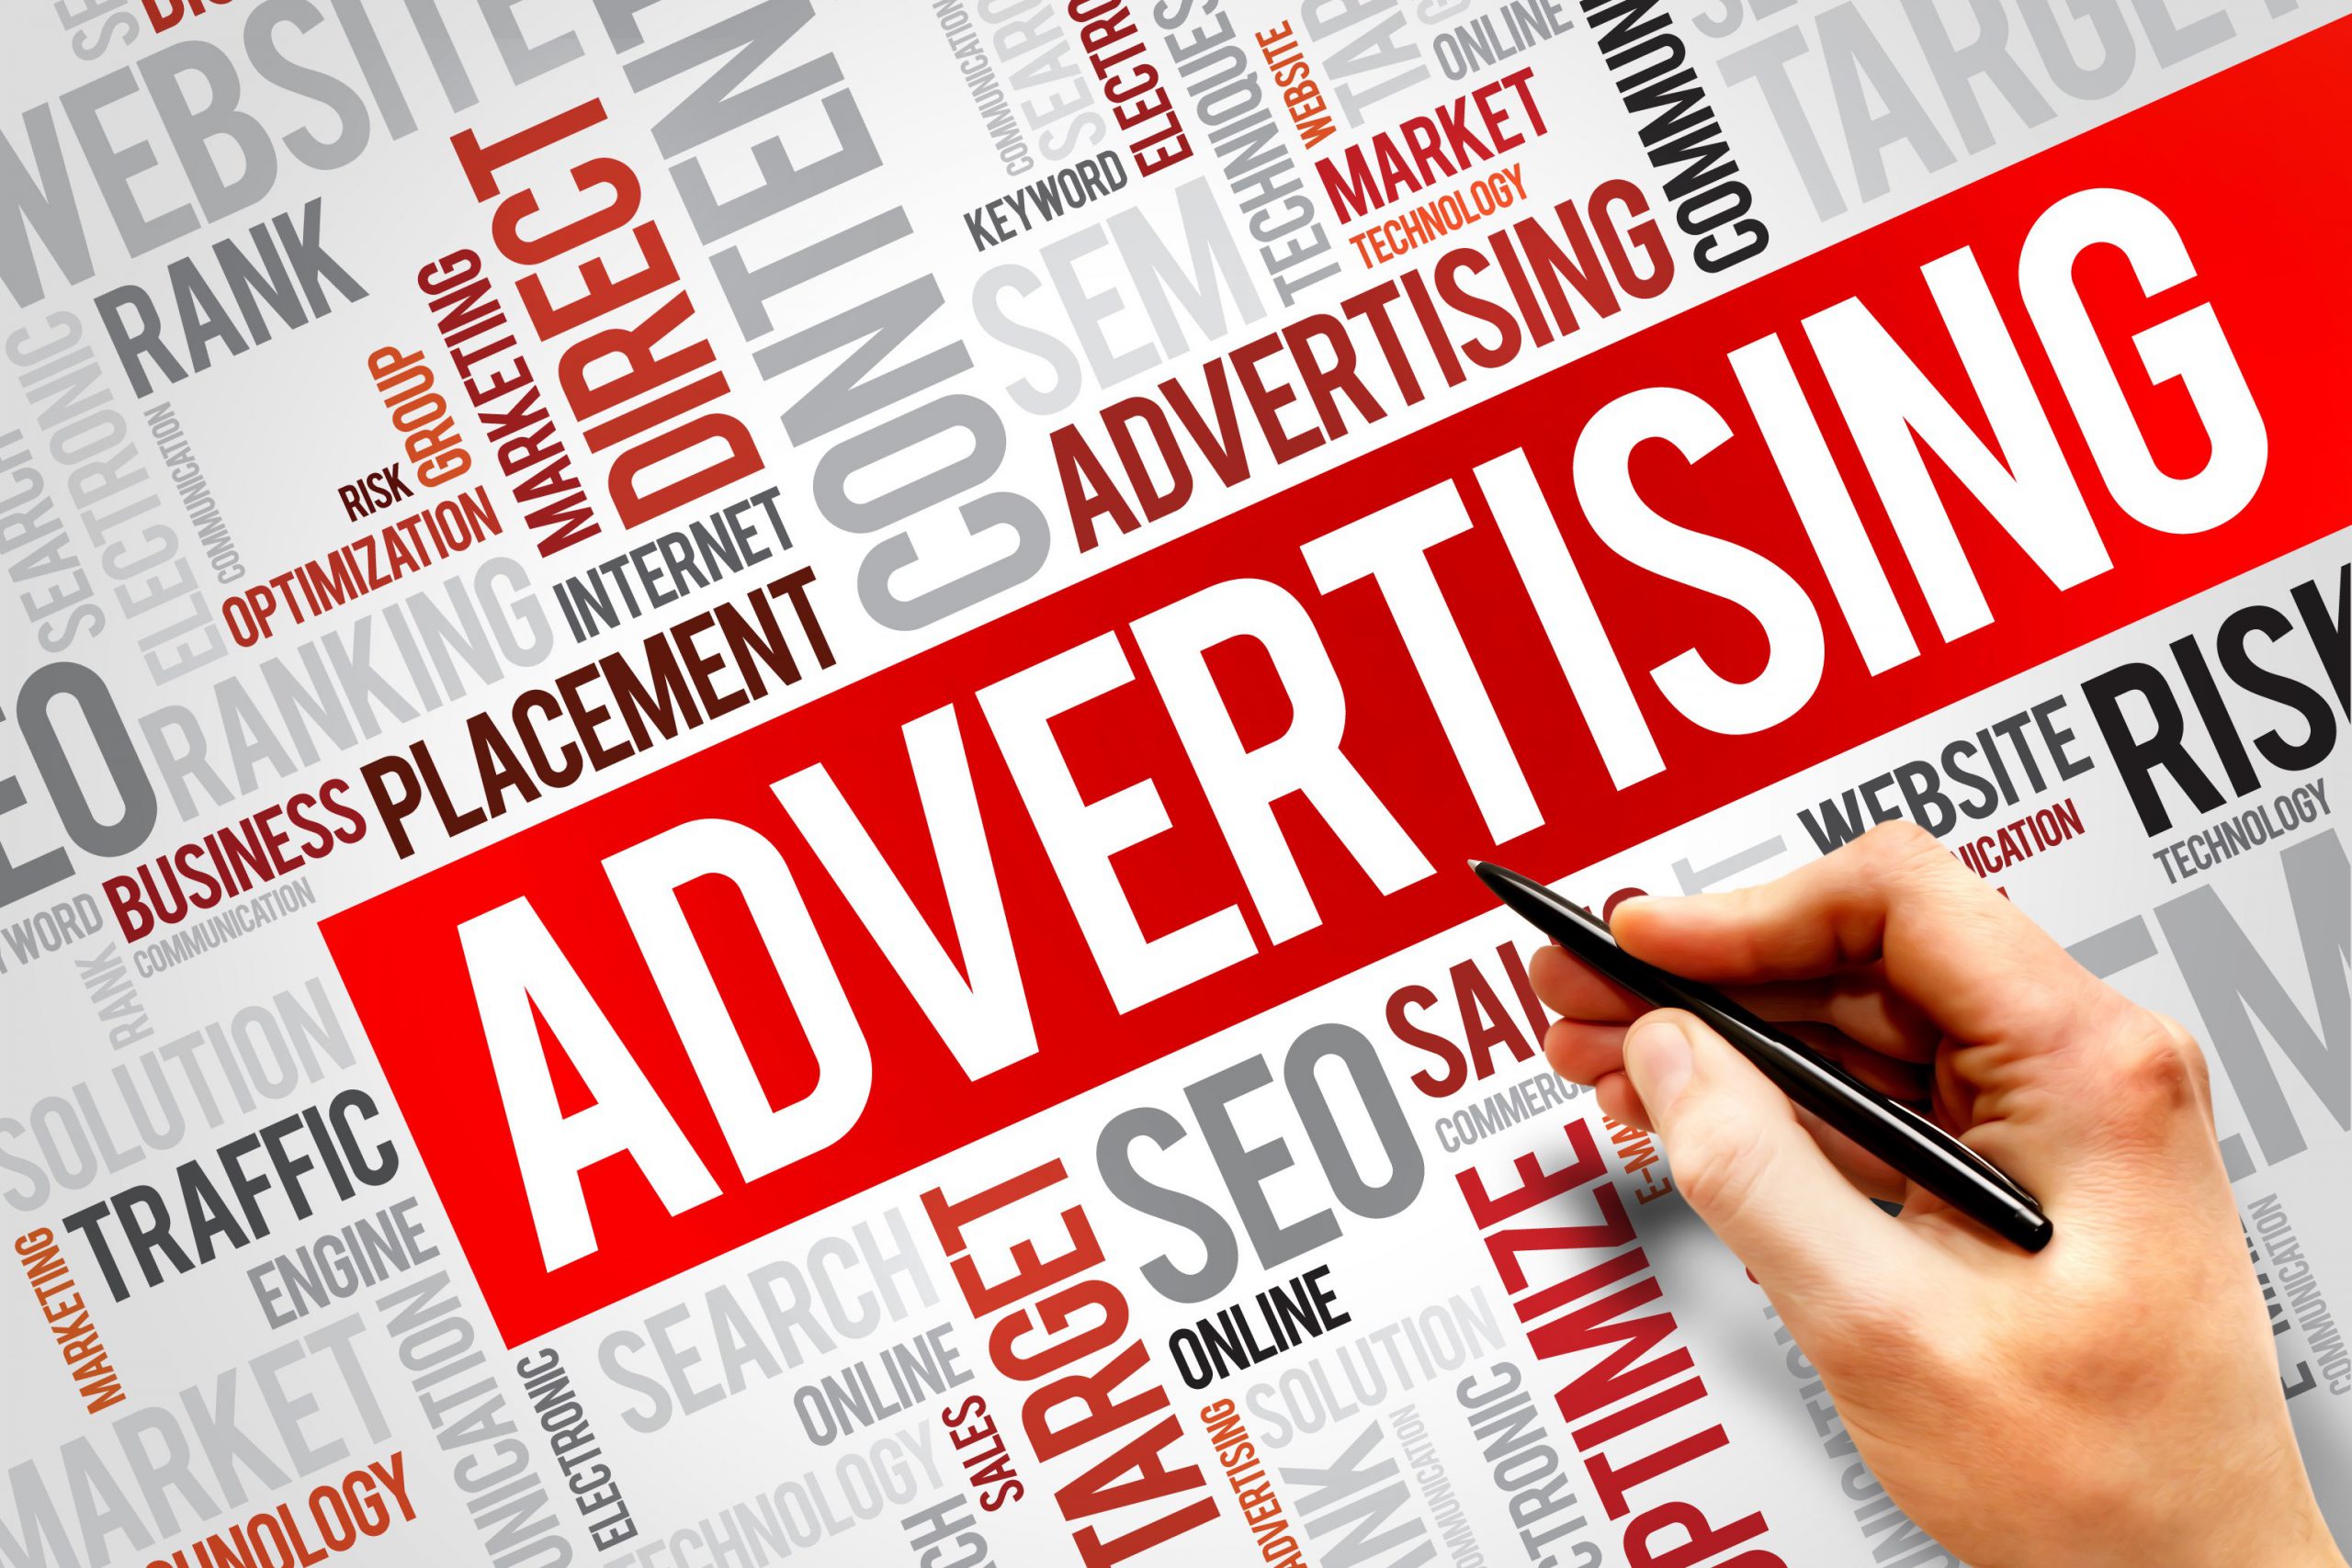 About advertising